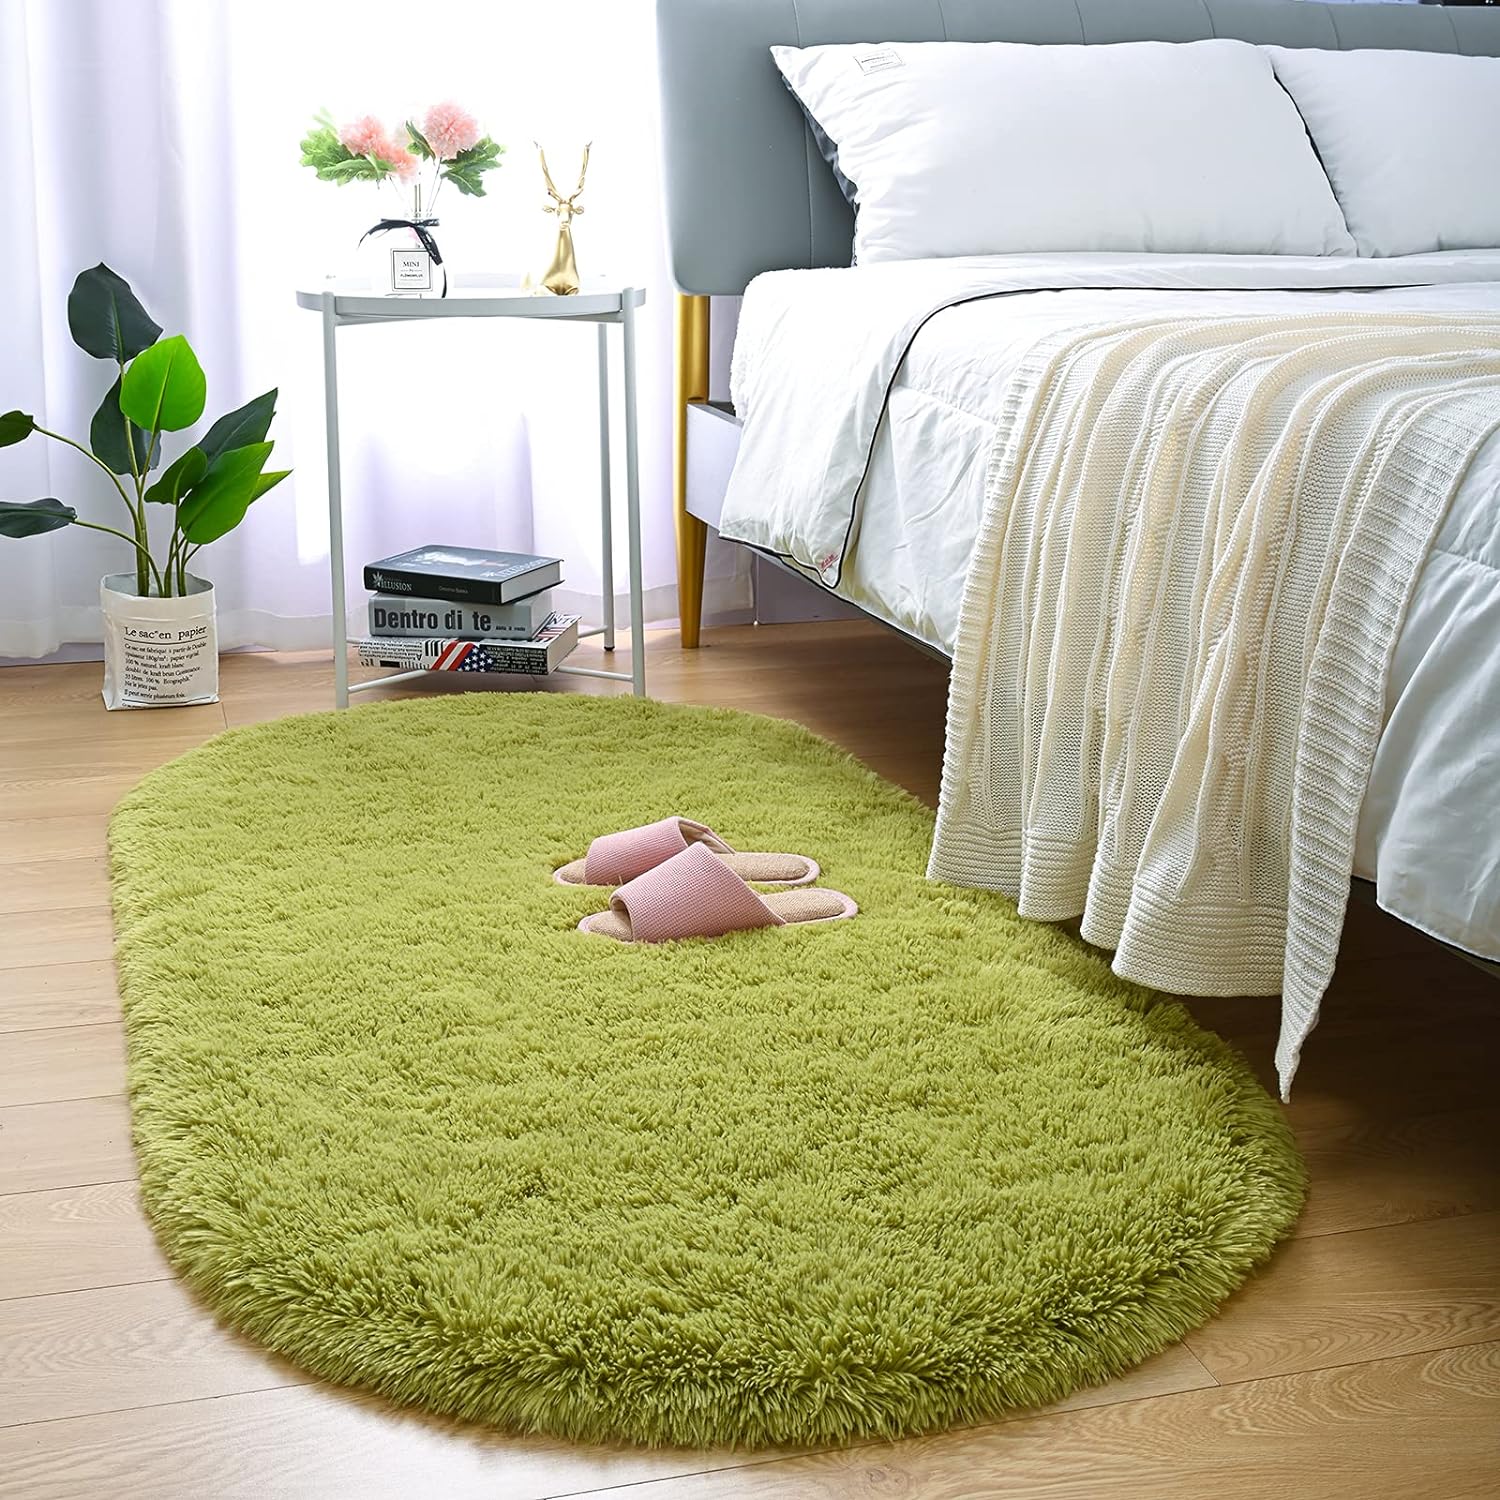 Merelax Soft Shaggy Rug for Kids Bedroom, Oval 2.6'x5.3' Green Plush Fluffy Carpets for Living Room, Furry Carpet for Teen Girls Room, Anti-Skid Fuzzy Comfy Rug for Nursery Decor Cute Baby Play Mat